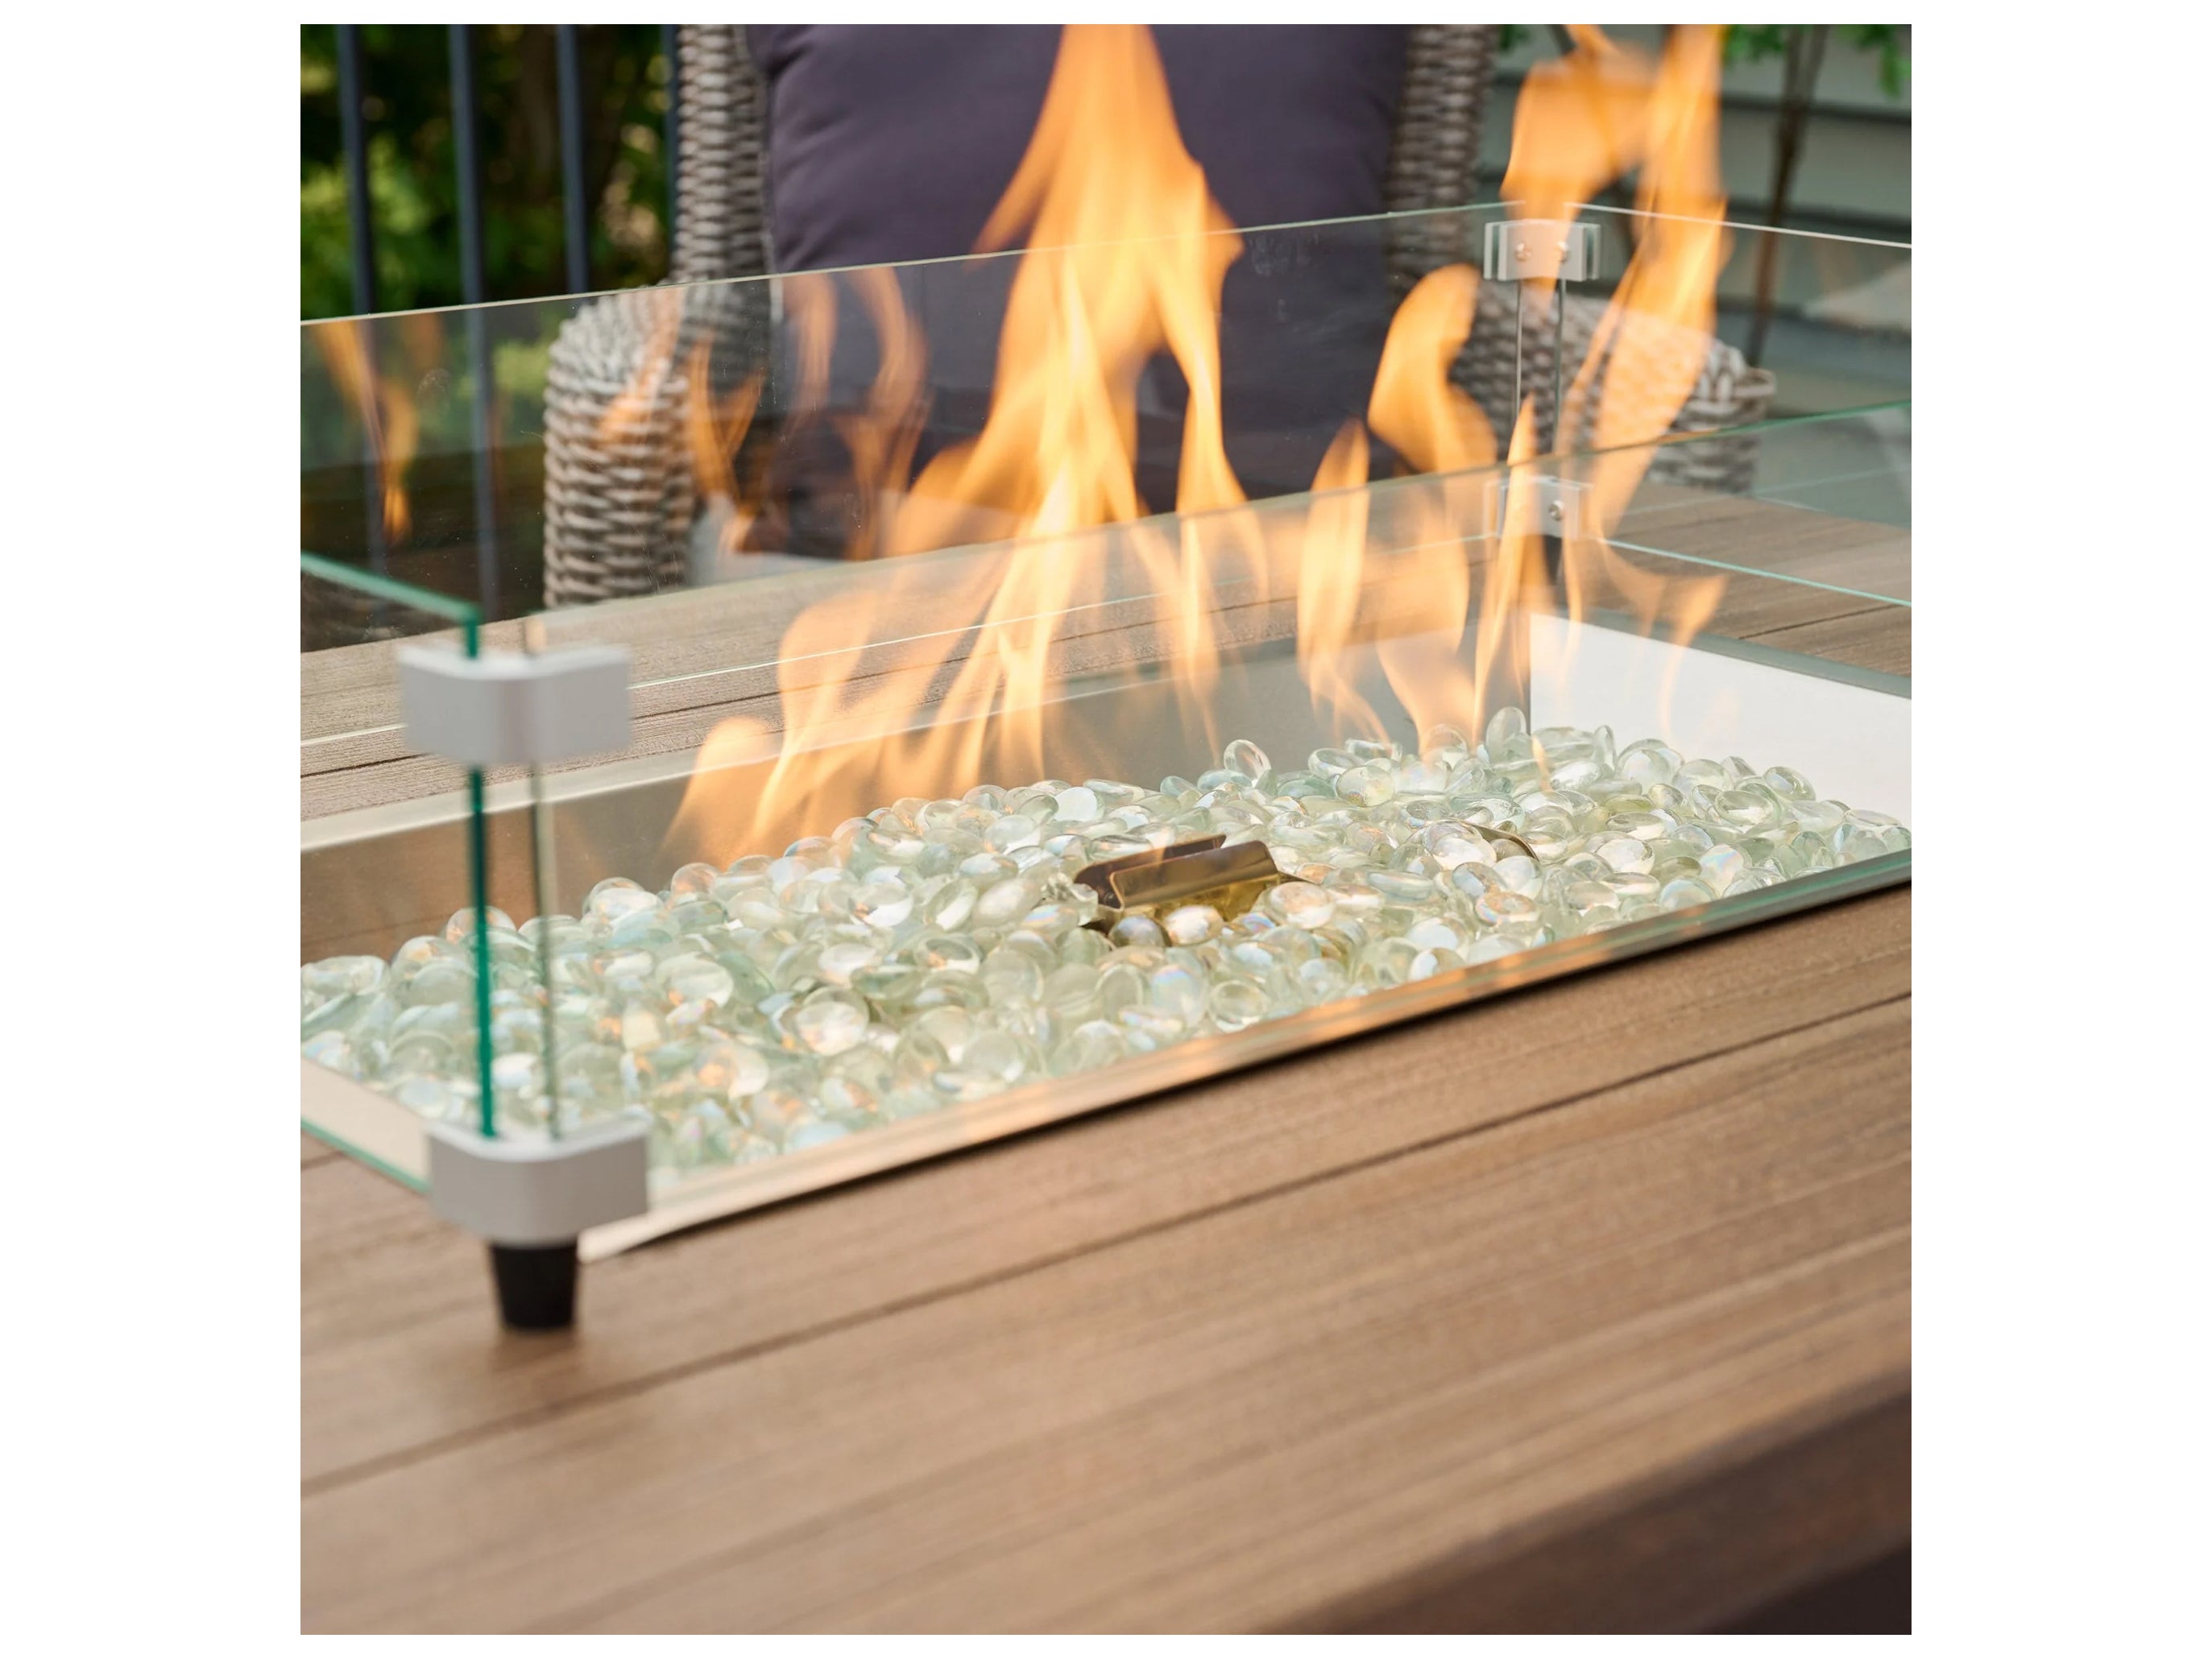 Outdoor Greatroom - 44’‘W x 30’'D - Havenwood Steel Luverne Black Rectangular Driftwood Everblend Top Gas Fire Pit Table